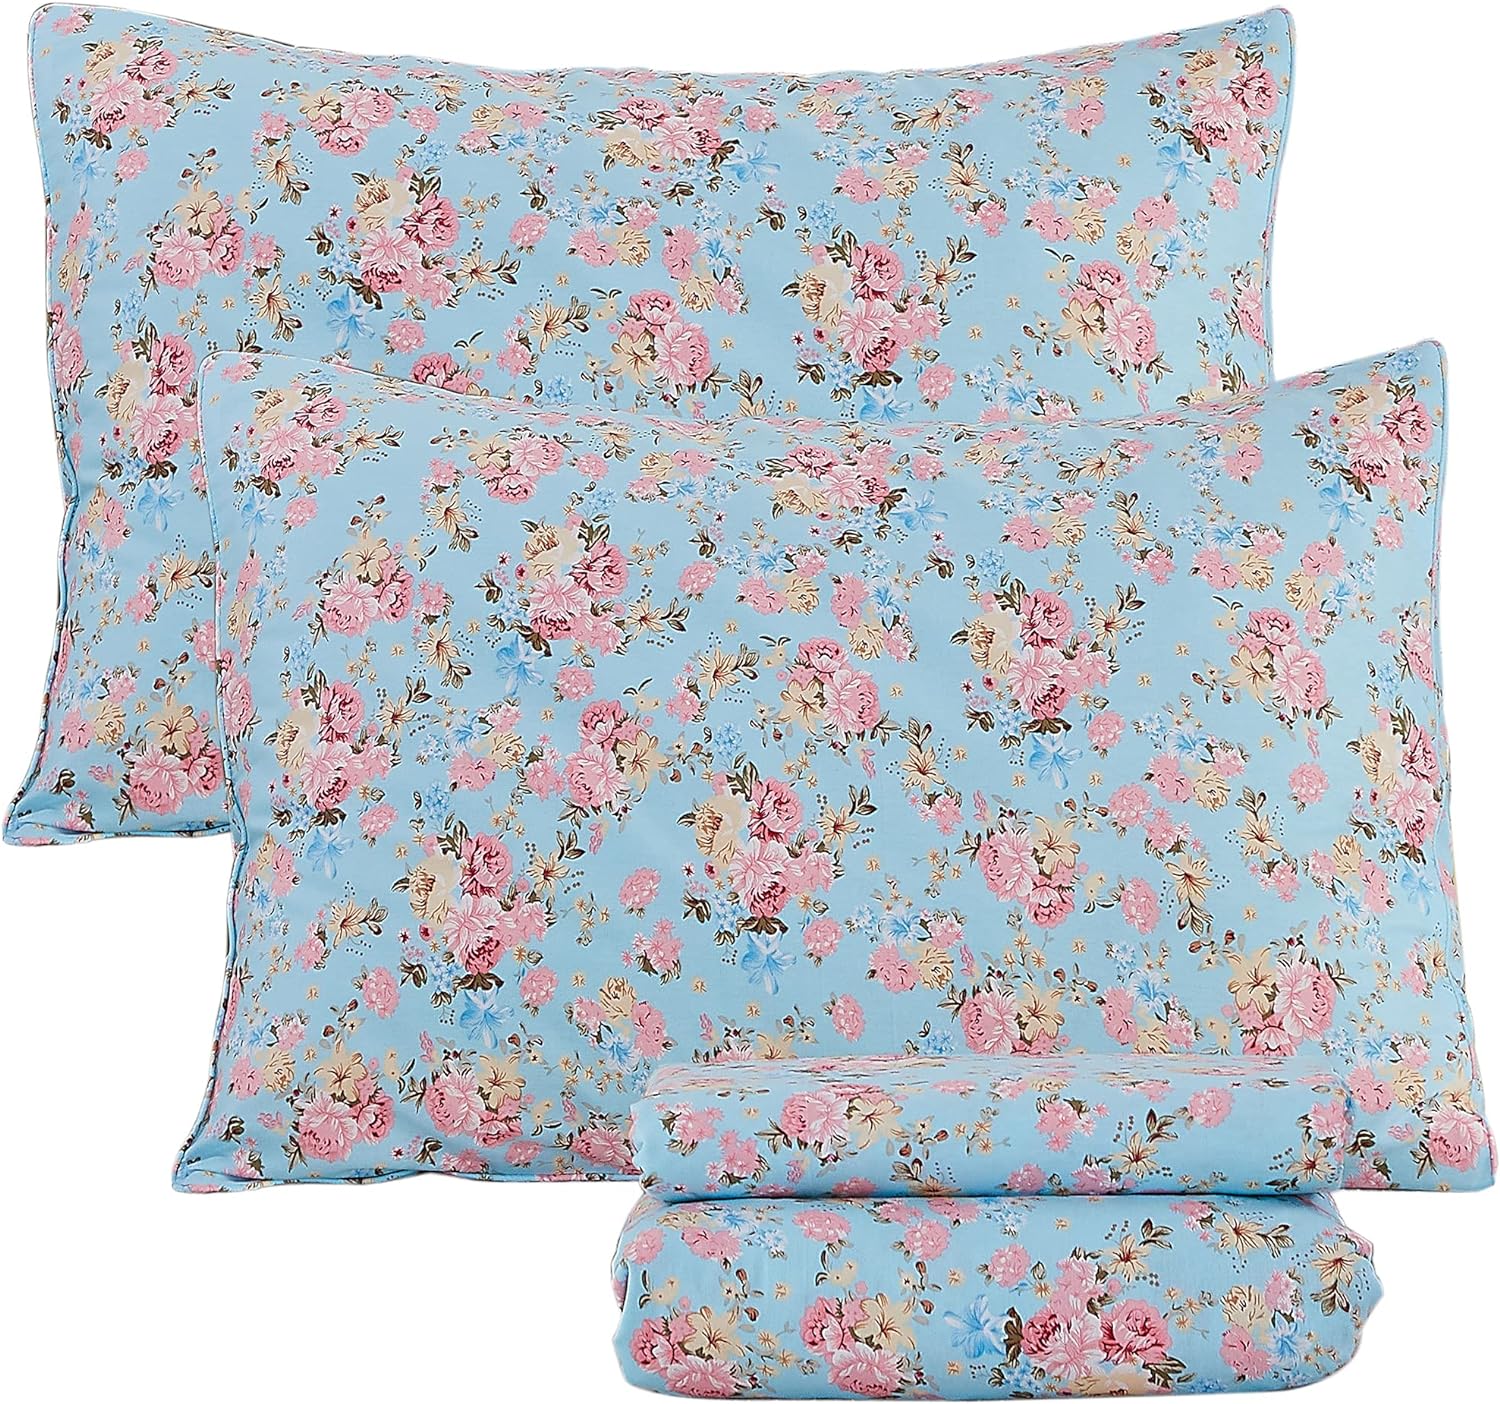 FADFAY Vintage Rose Floral Sheets Set Queen Shabby Blue and Pink Girls Floral Bedding Elegant Romantic Farmhouse Bedding 100% Cotton Super Soft Bedding with Deep Pocket Fitted Sheet 4Pcs, Queen Size